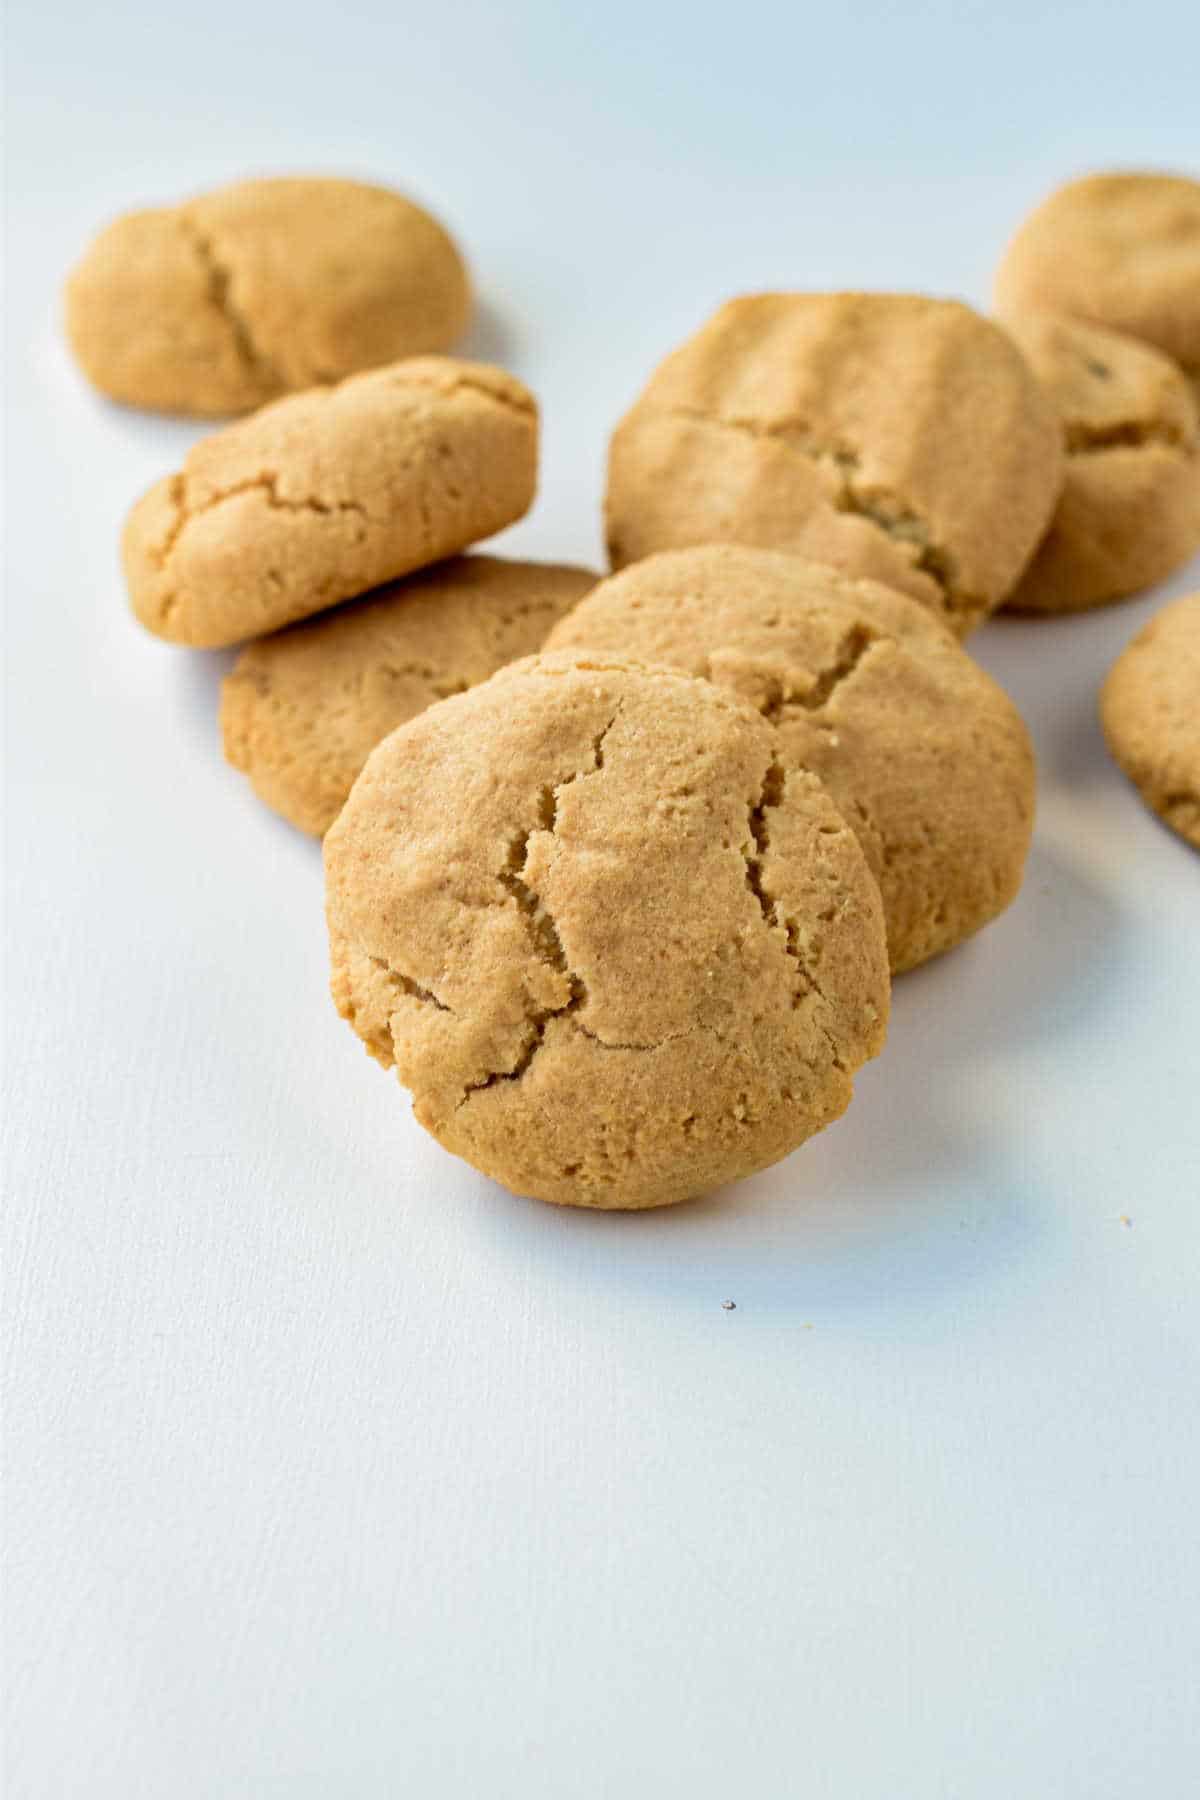 Keto Biscuits with Smooth Edges